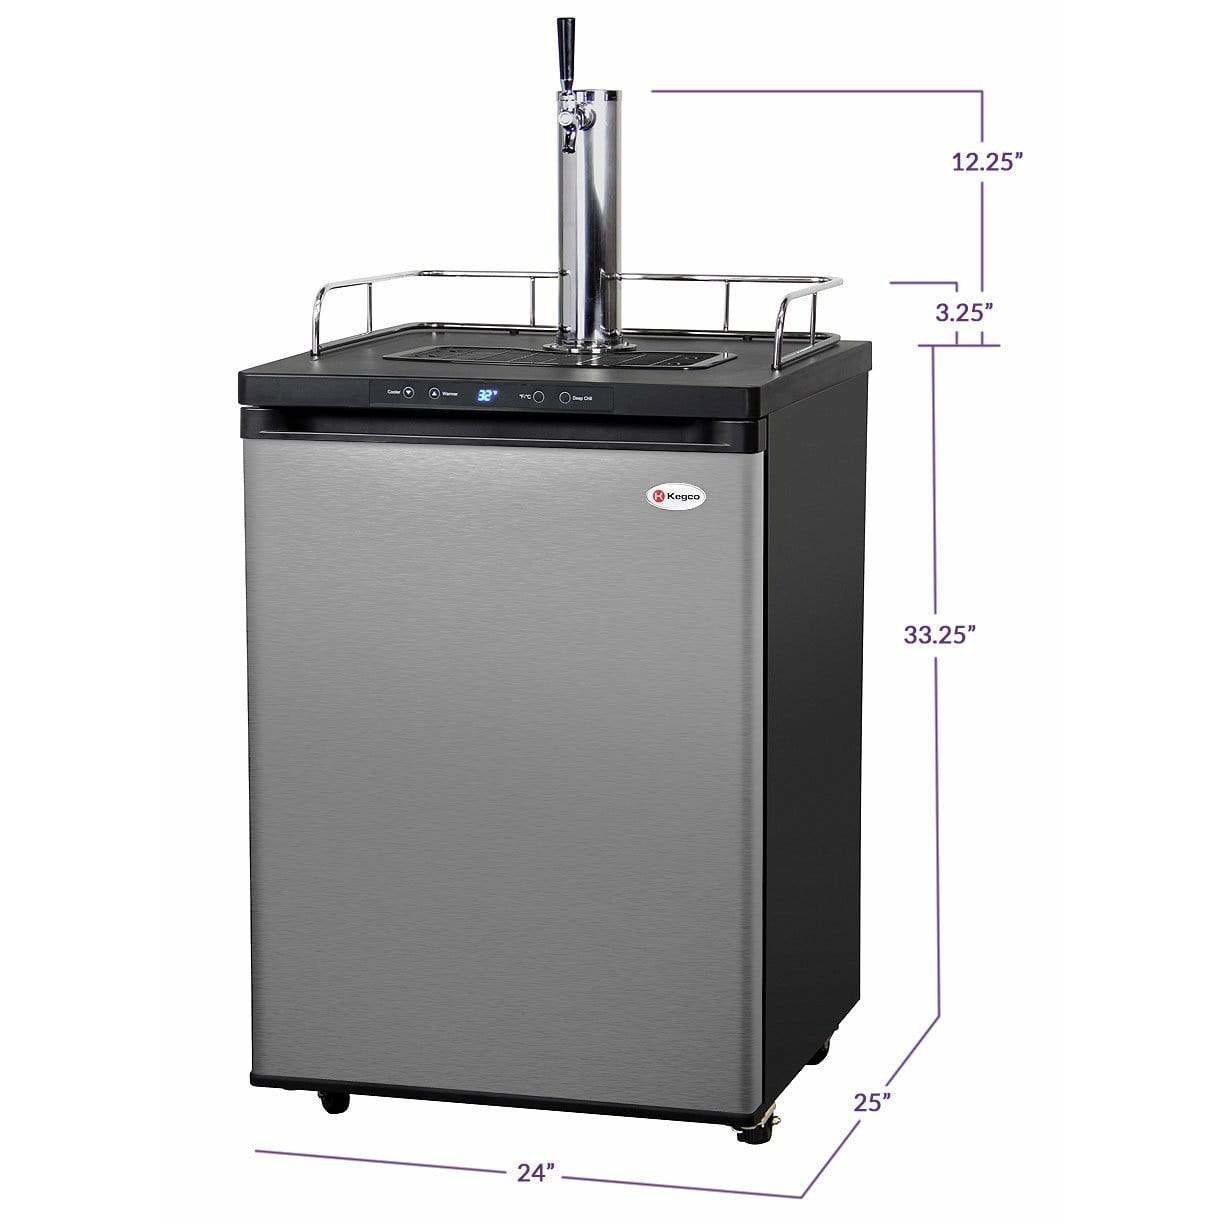 Kegco 24" Wide  Single Tap Stainless Steel Home Brew Kegerator HBK309S-1 Wine Coolers Empire